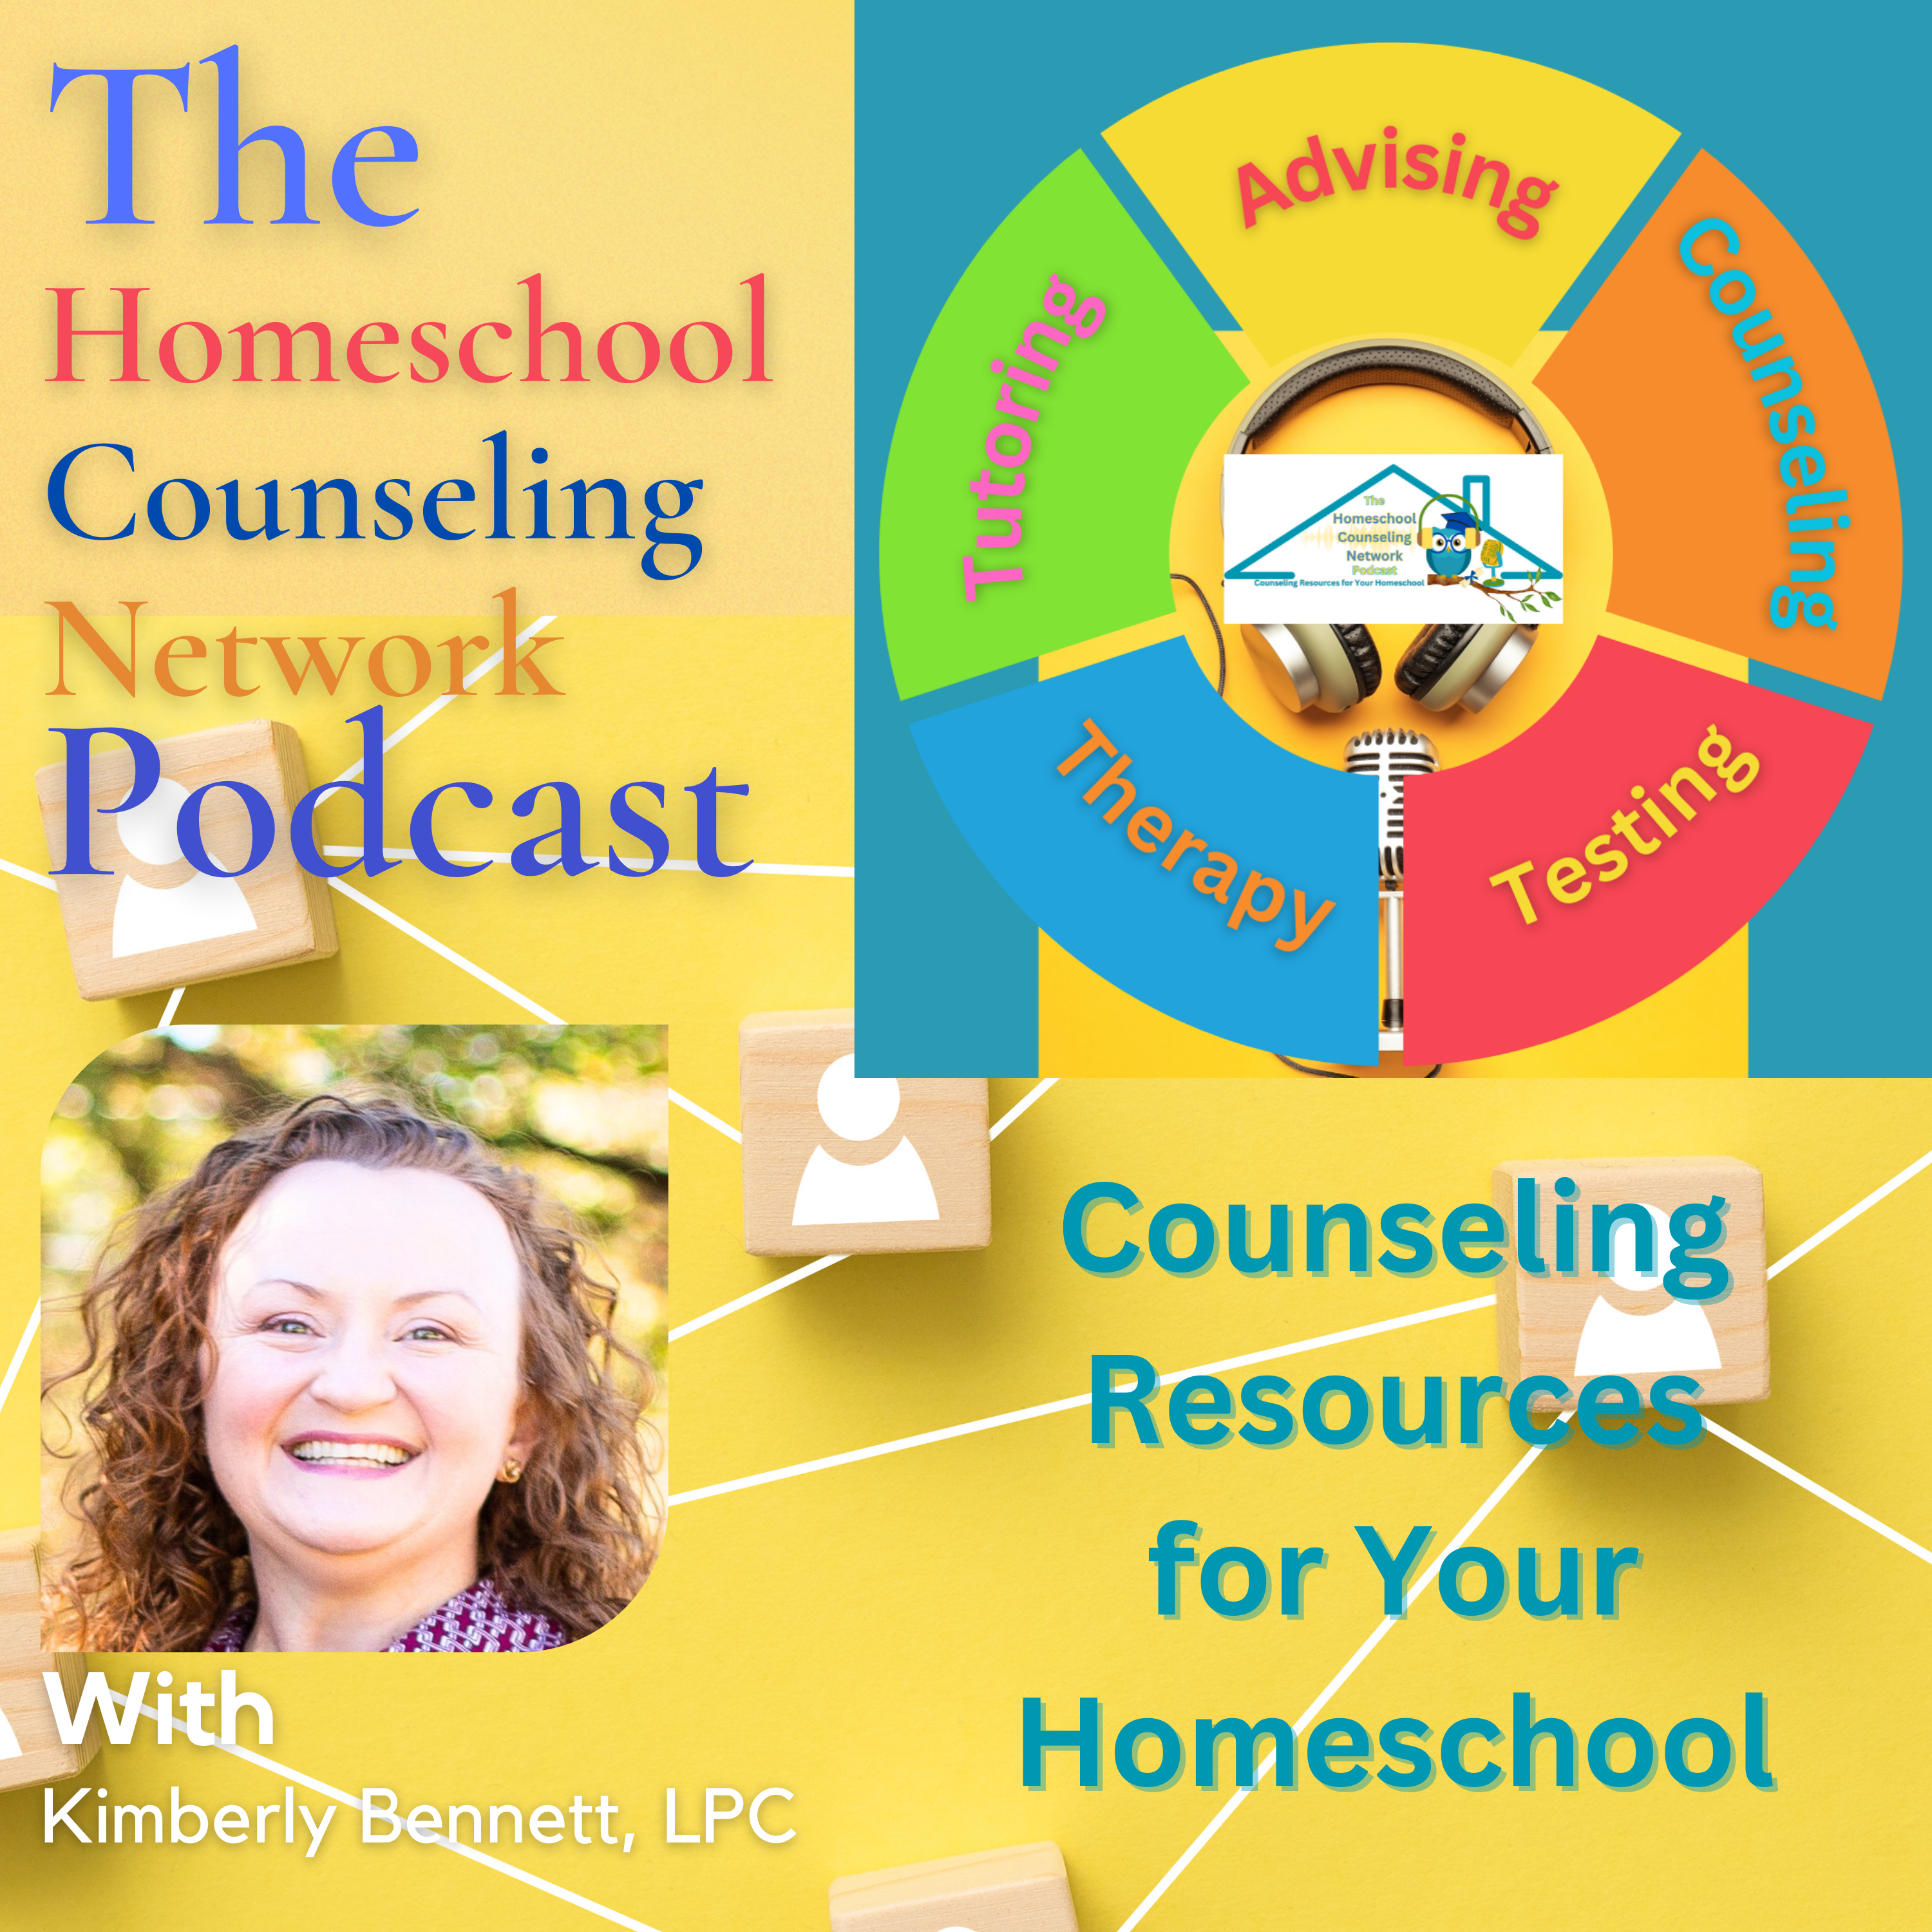 The Homeschool Counseling Network Podcast